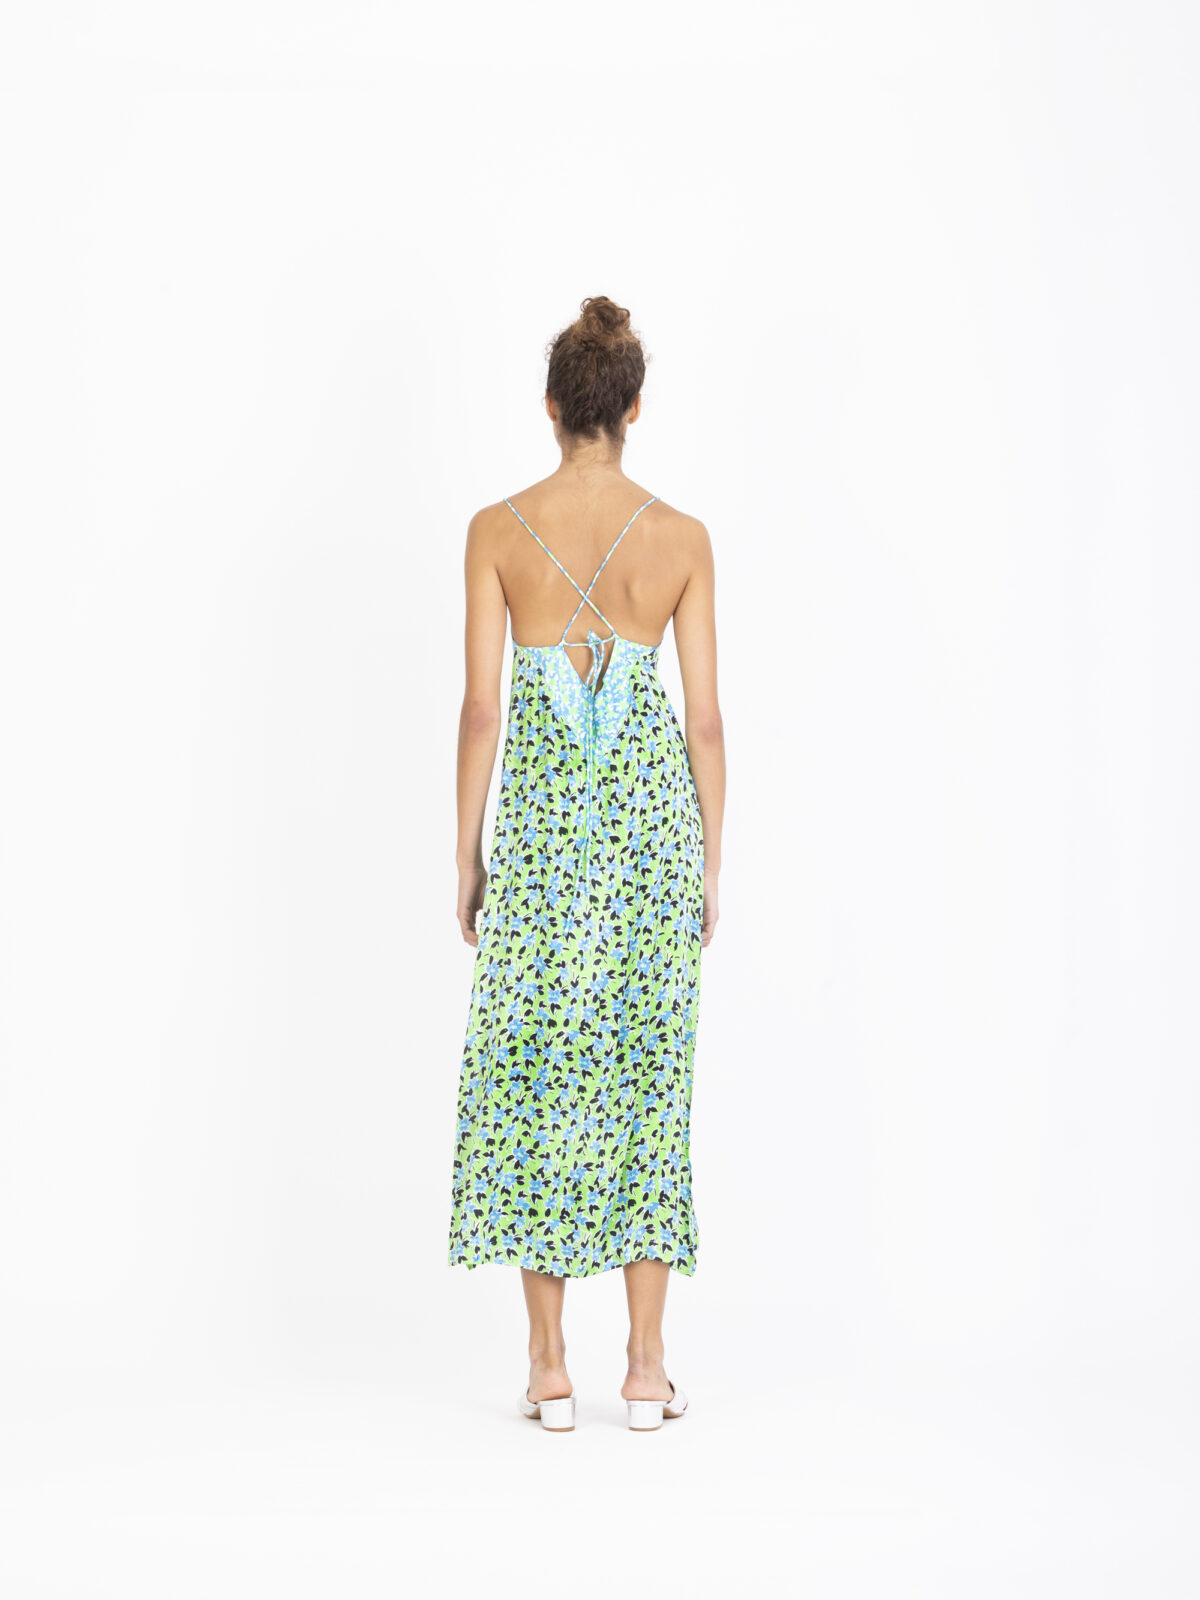 chelsy-green-floral-dress-backless-thin-straps-satin-suncoo-matchboxathens